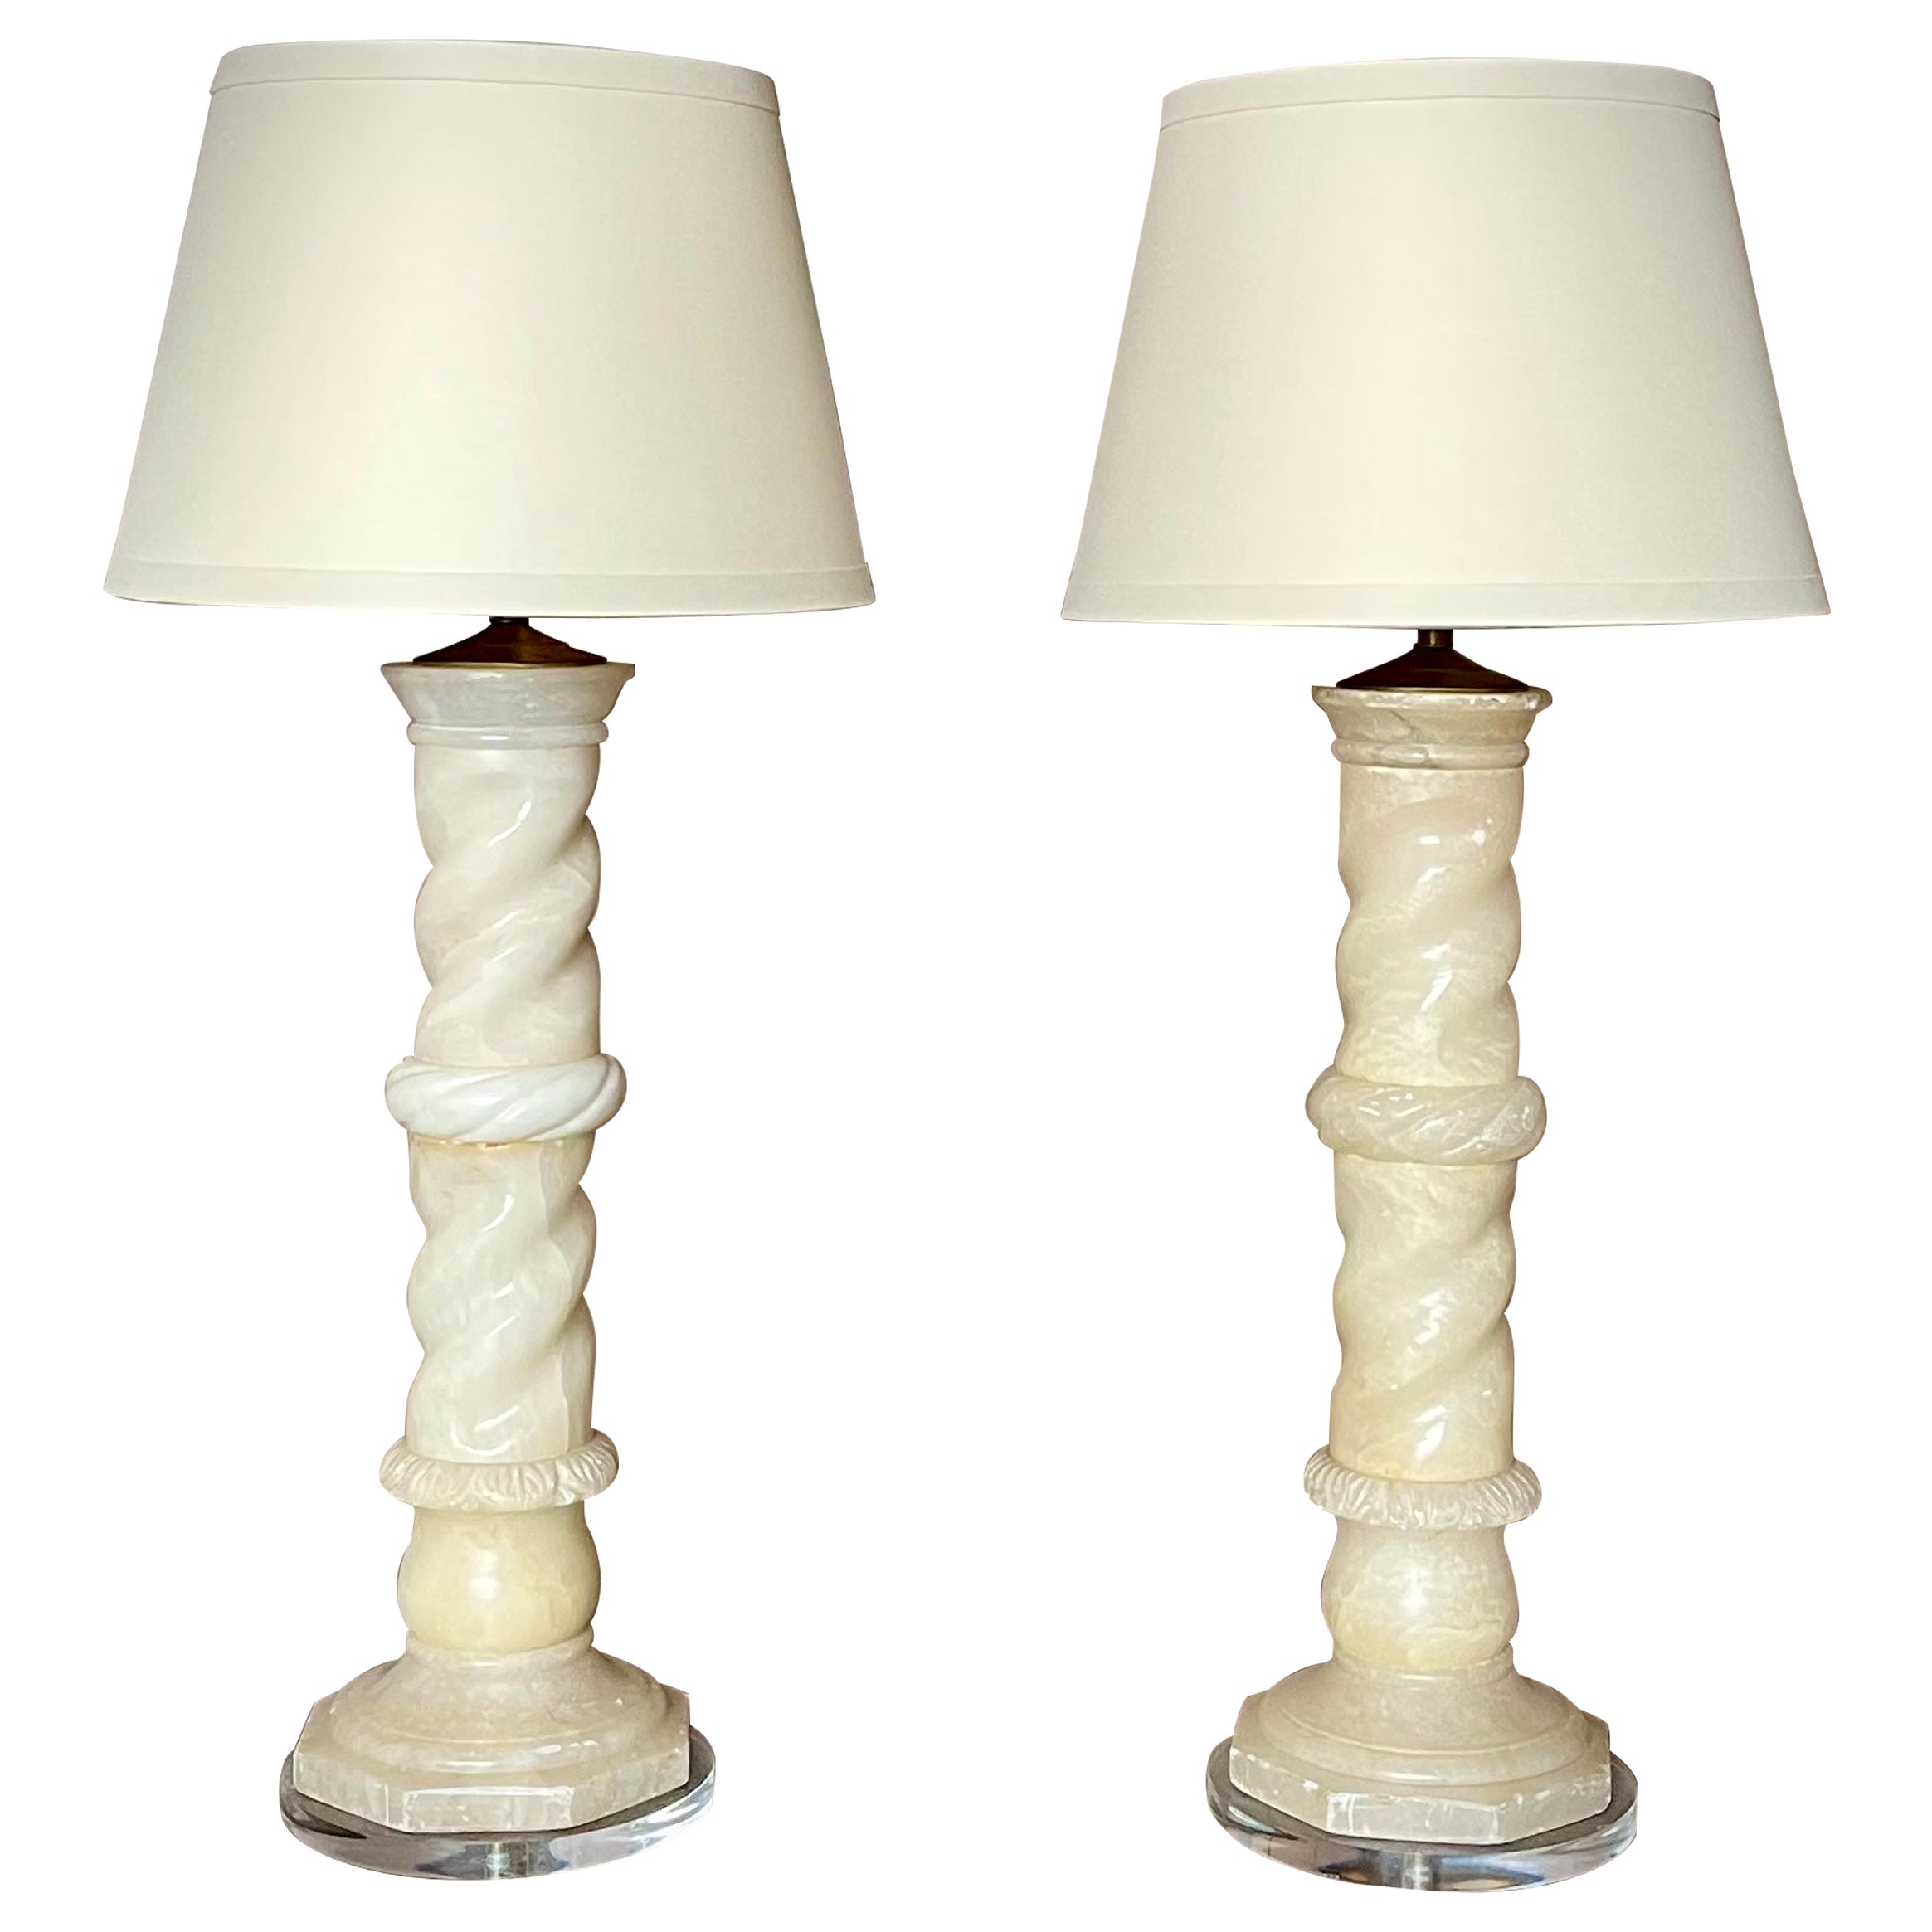 Hand-Carved Table Lamps